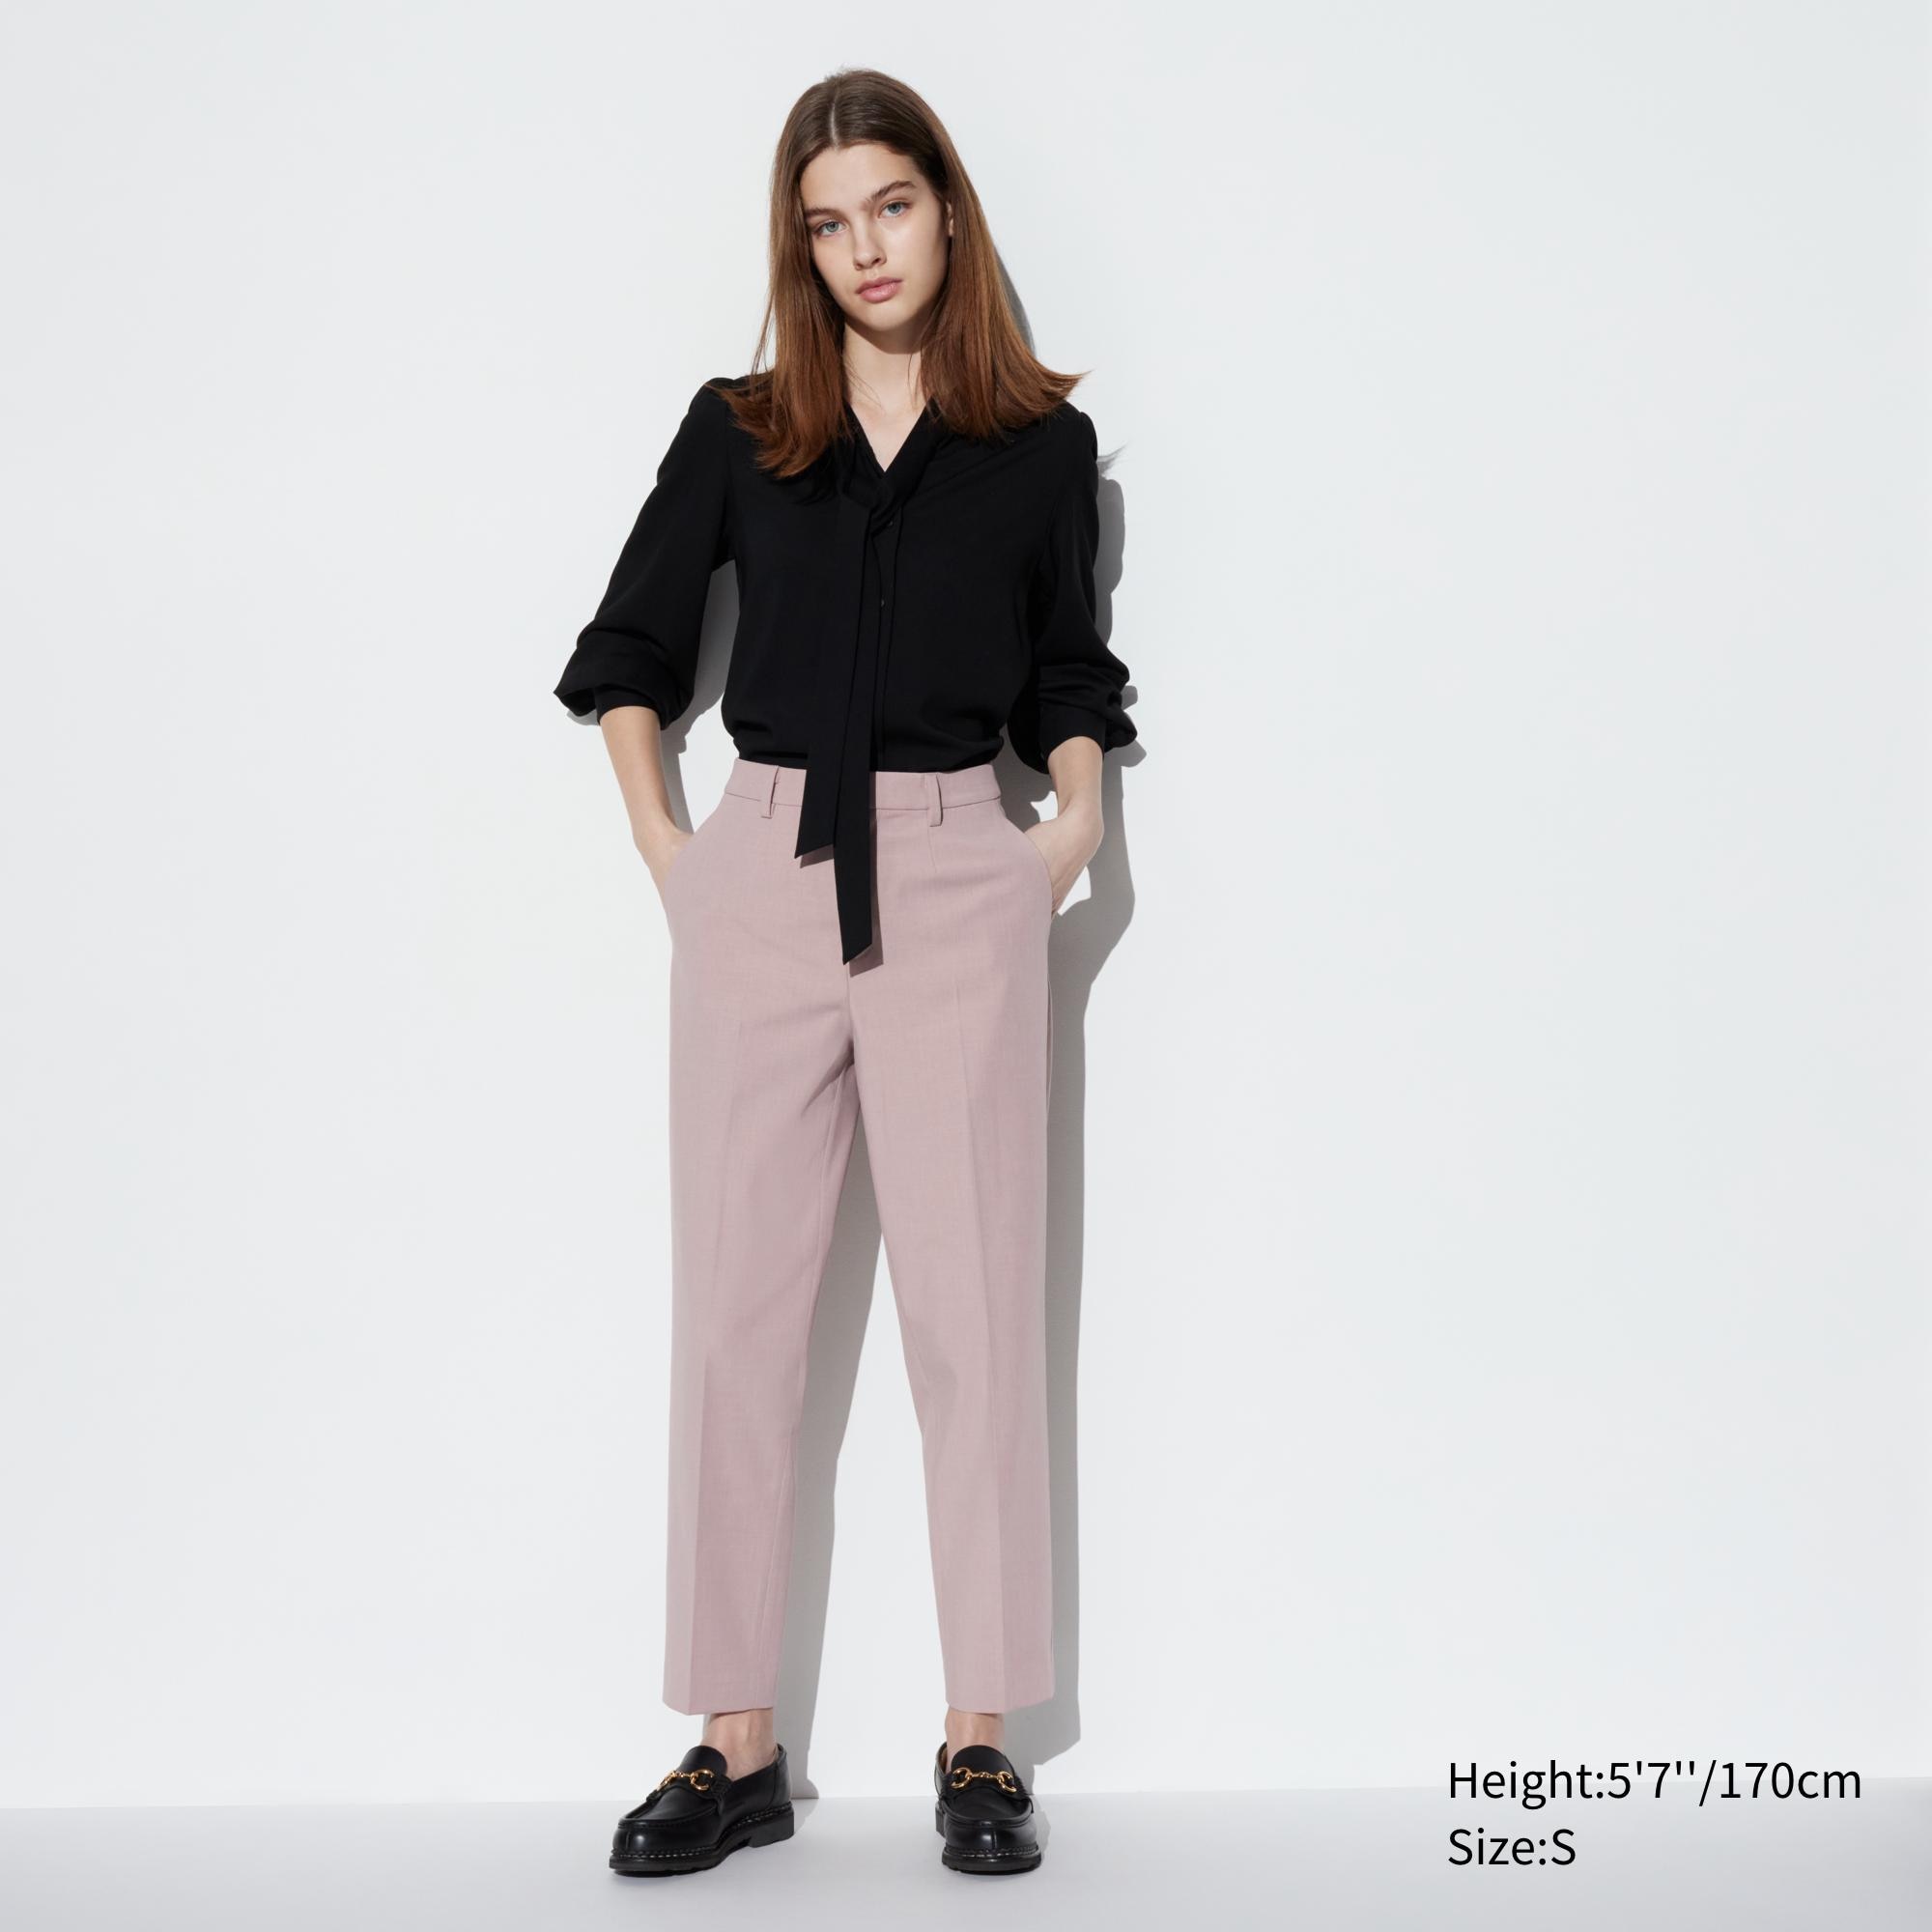 Sites-GB-Site | Uniqlo, Curved pants, Trousers women